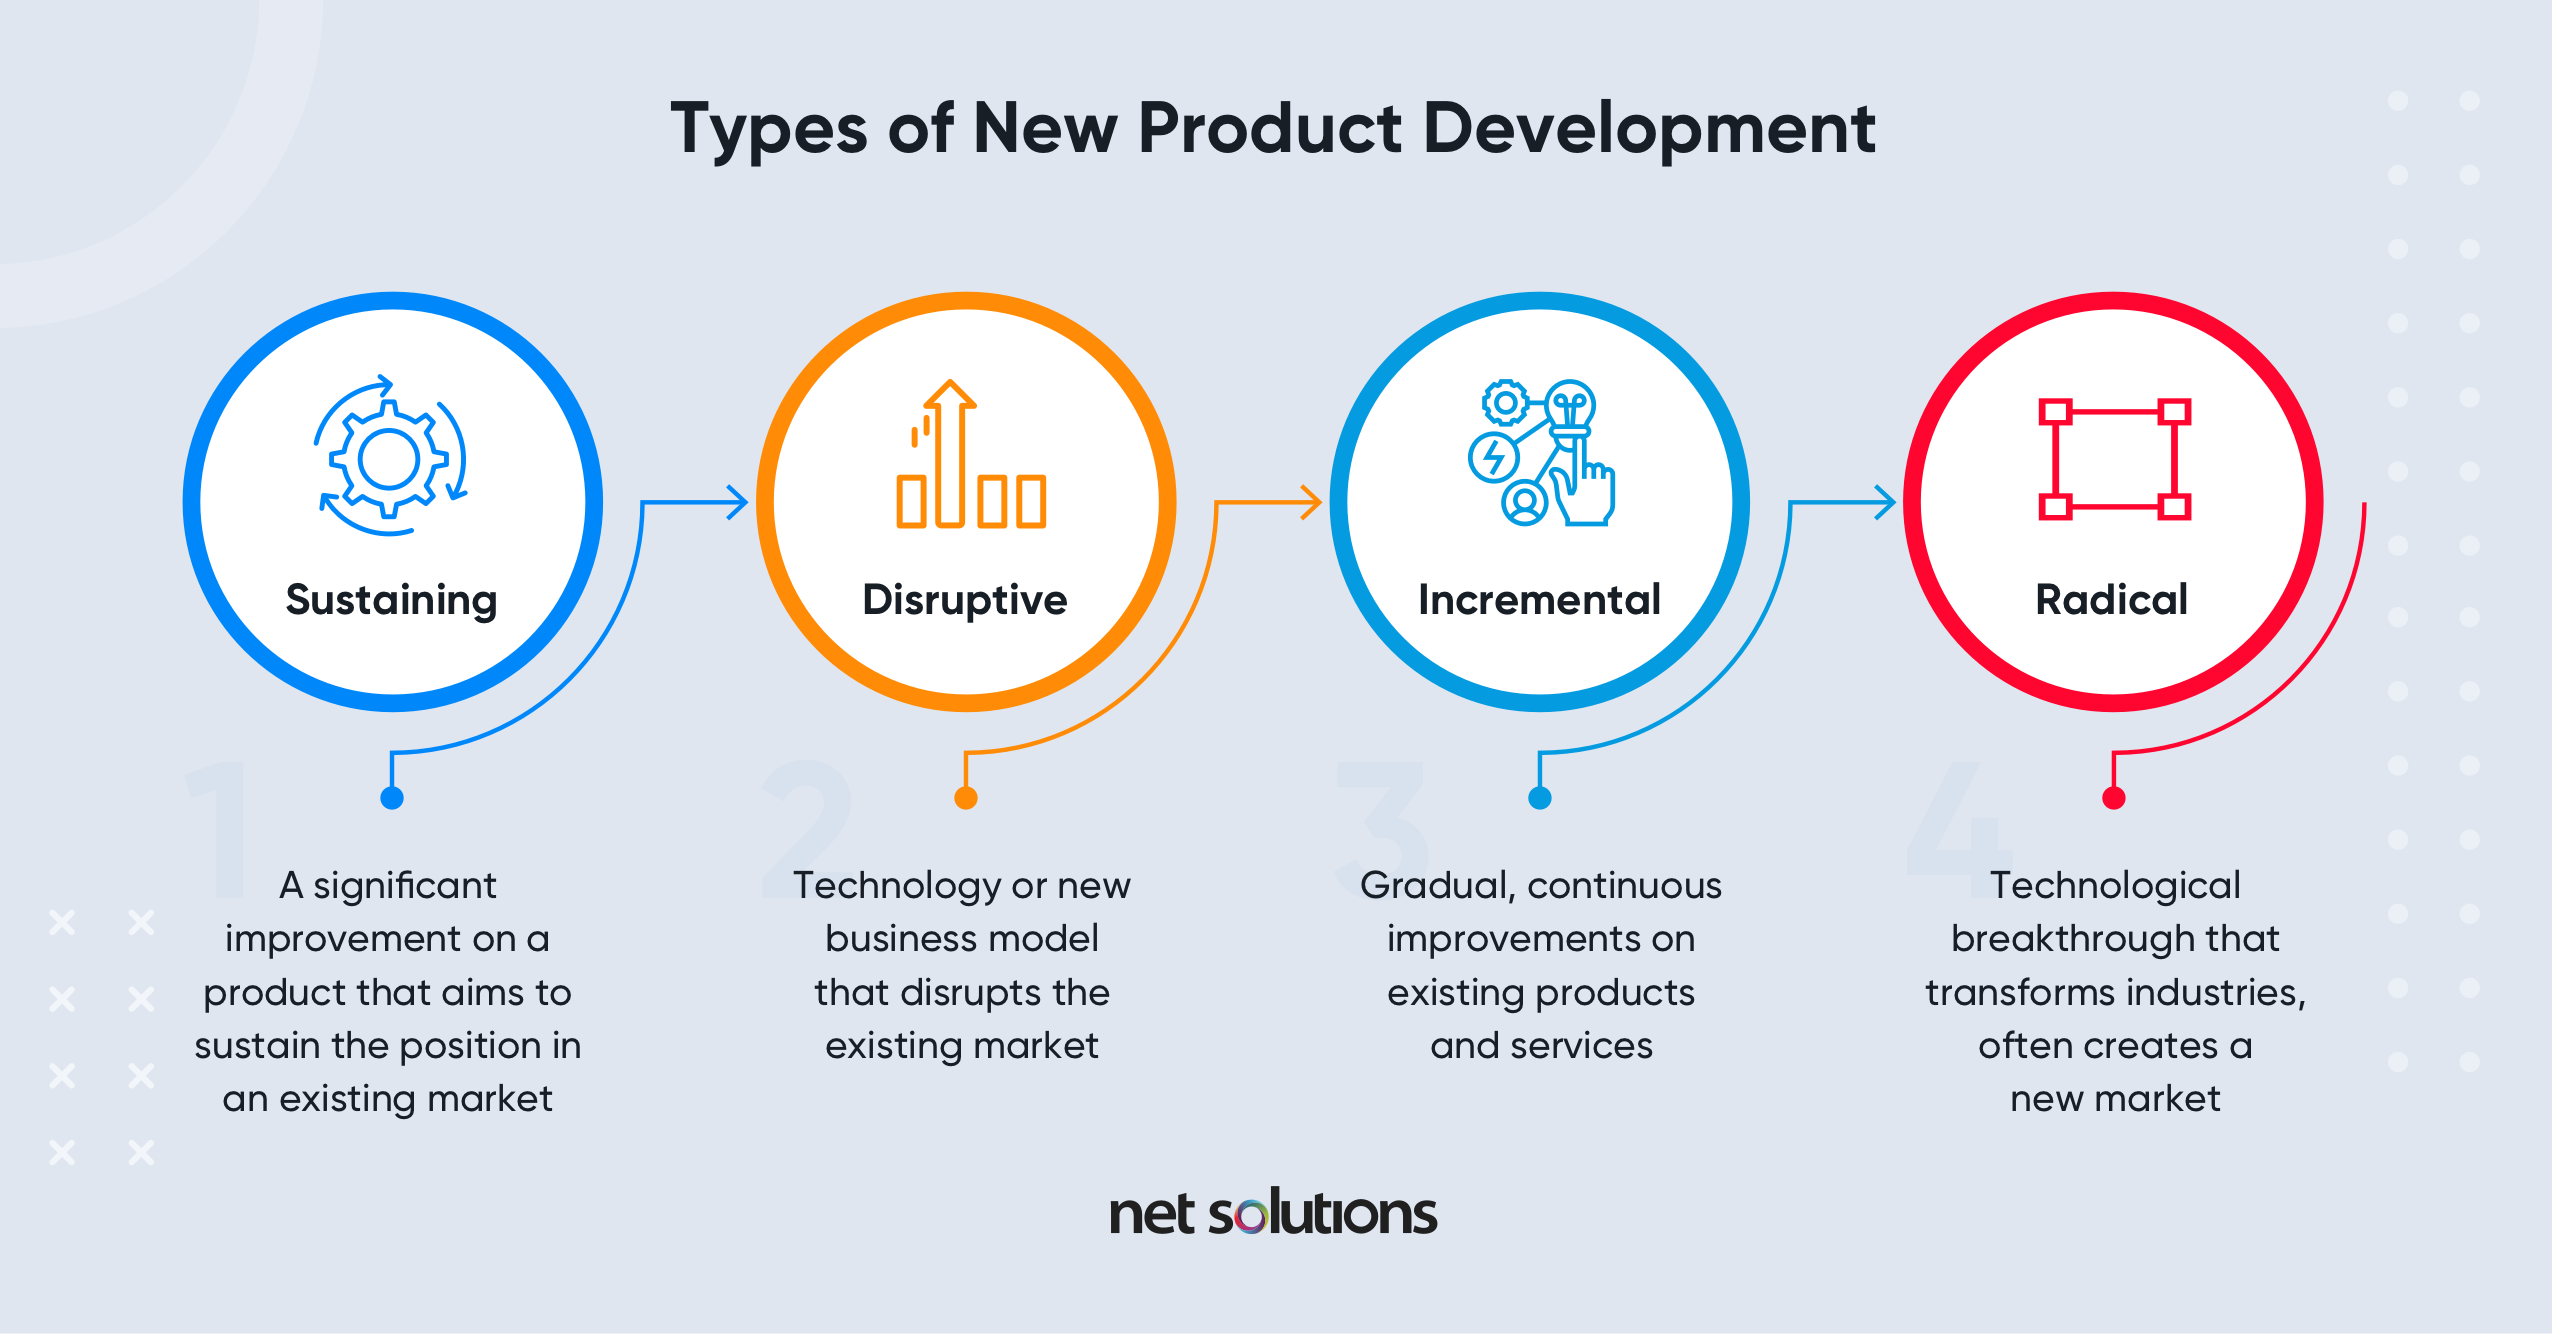 Describe Four Organizational Approaches to Product Development